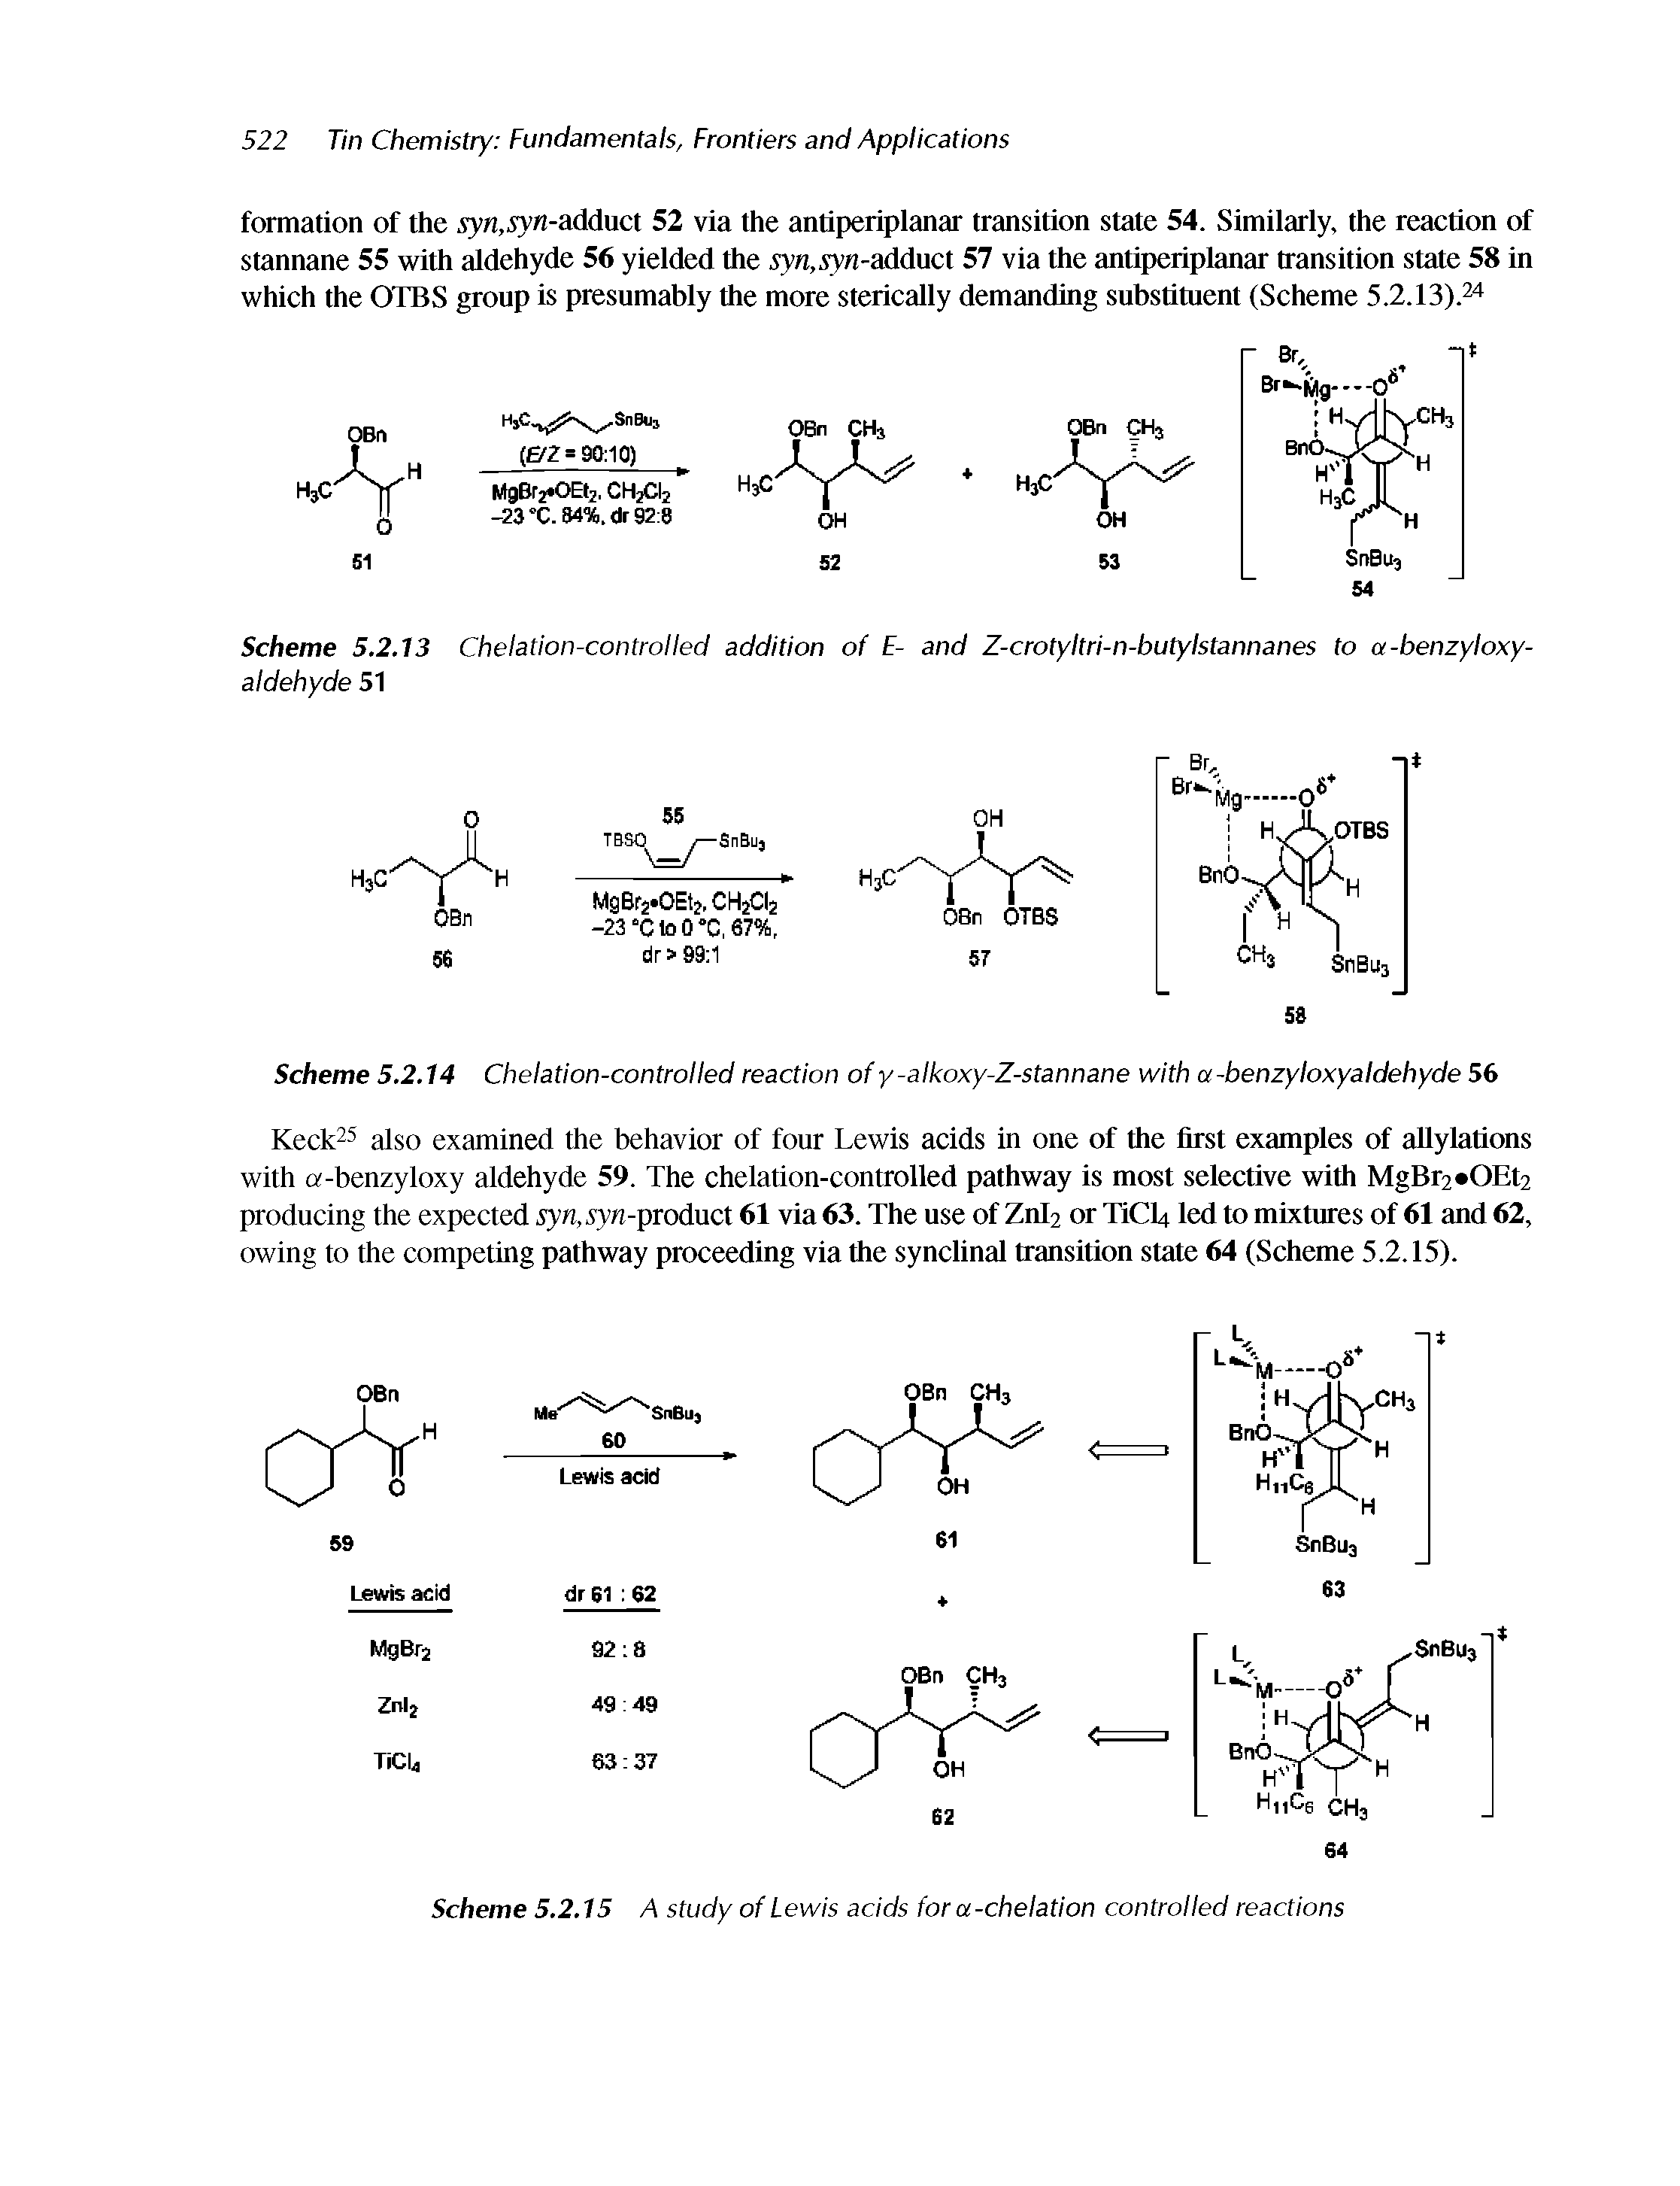 Scheme 5.2.15 A study of Lewis acids for a-chelation controlled reactions...